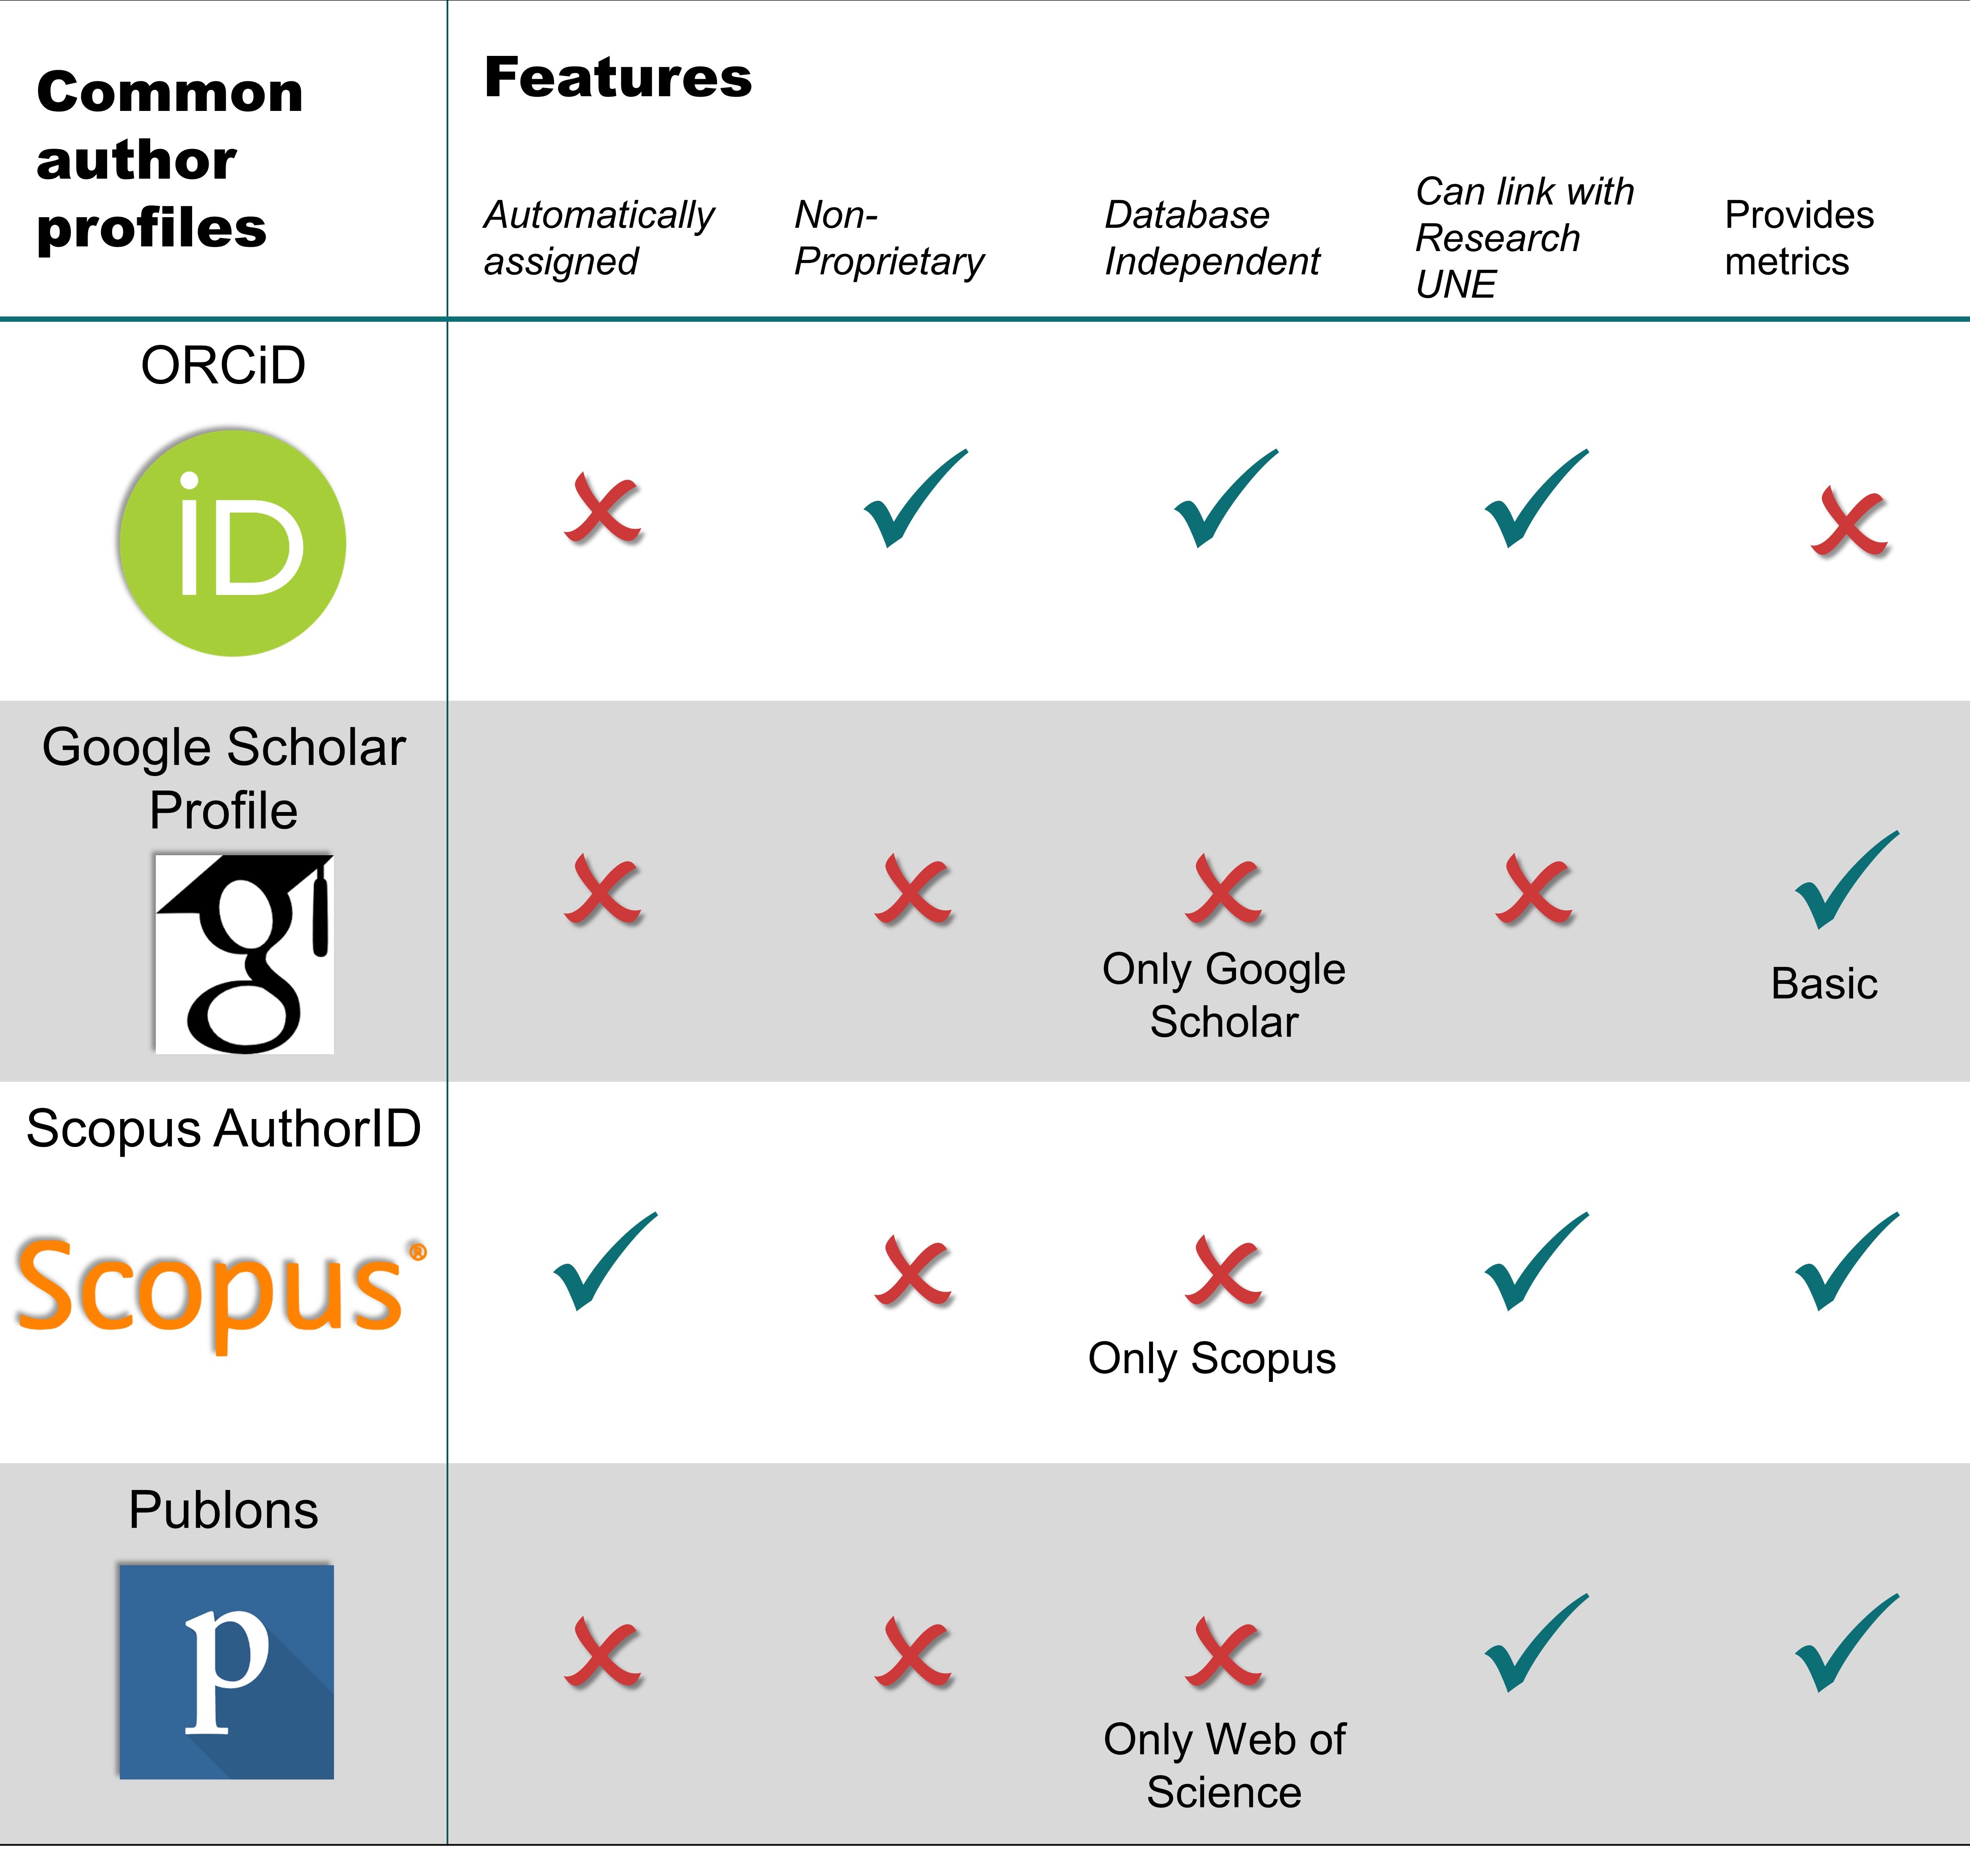 Table 12.2.1 Comparison of the common author profiles utilised by researchers